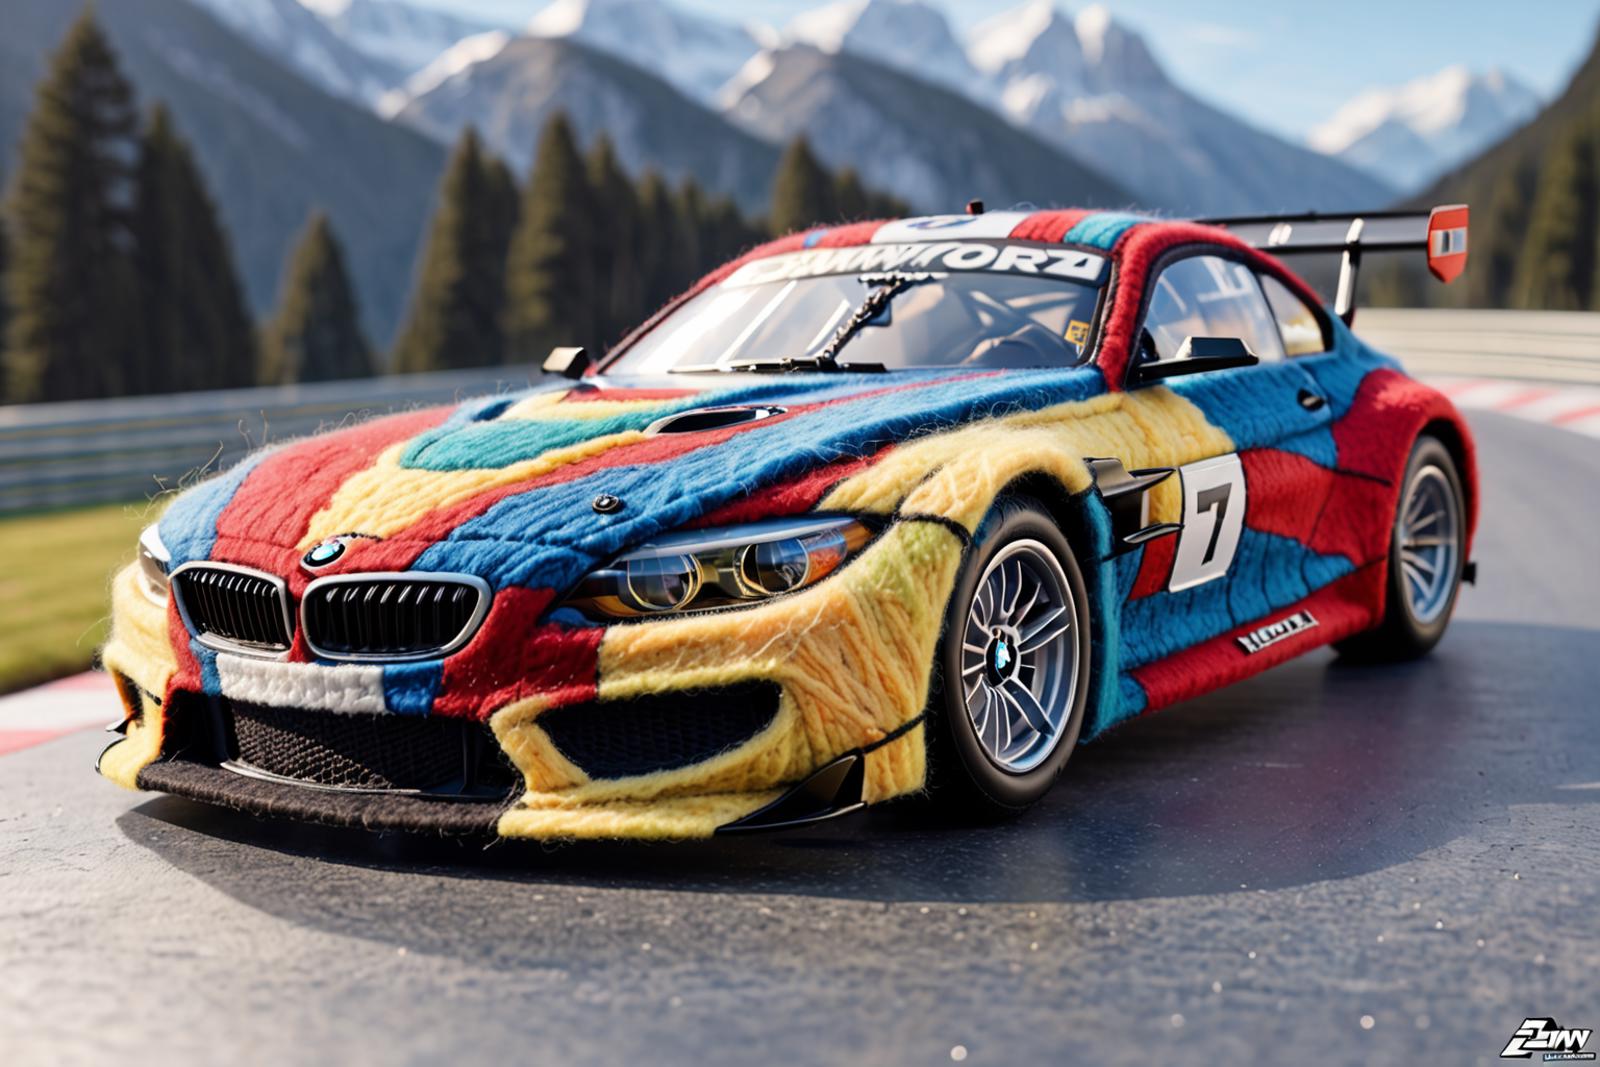 Colorful BMW Race Car with a Stuffed Animal Body on a Mountain Road